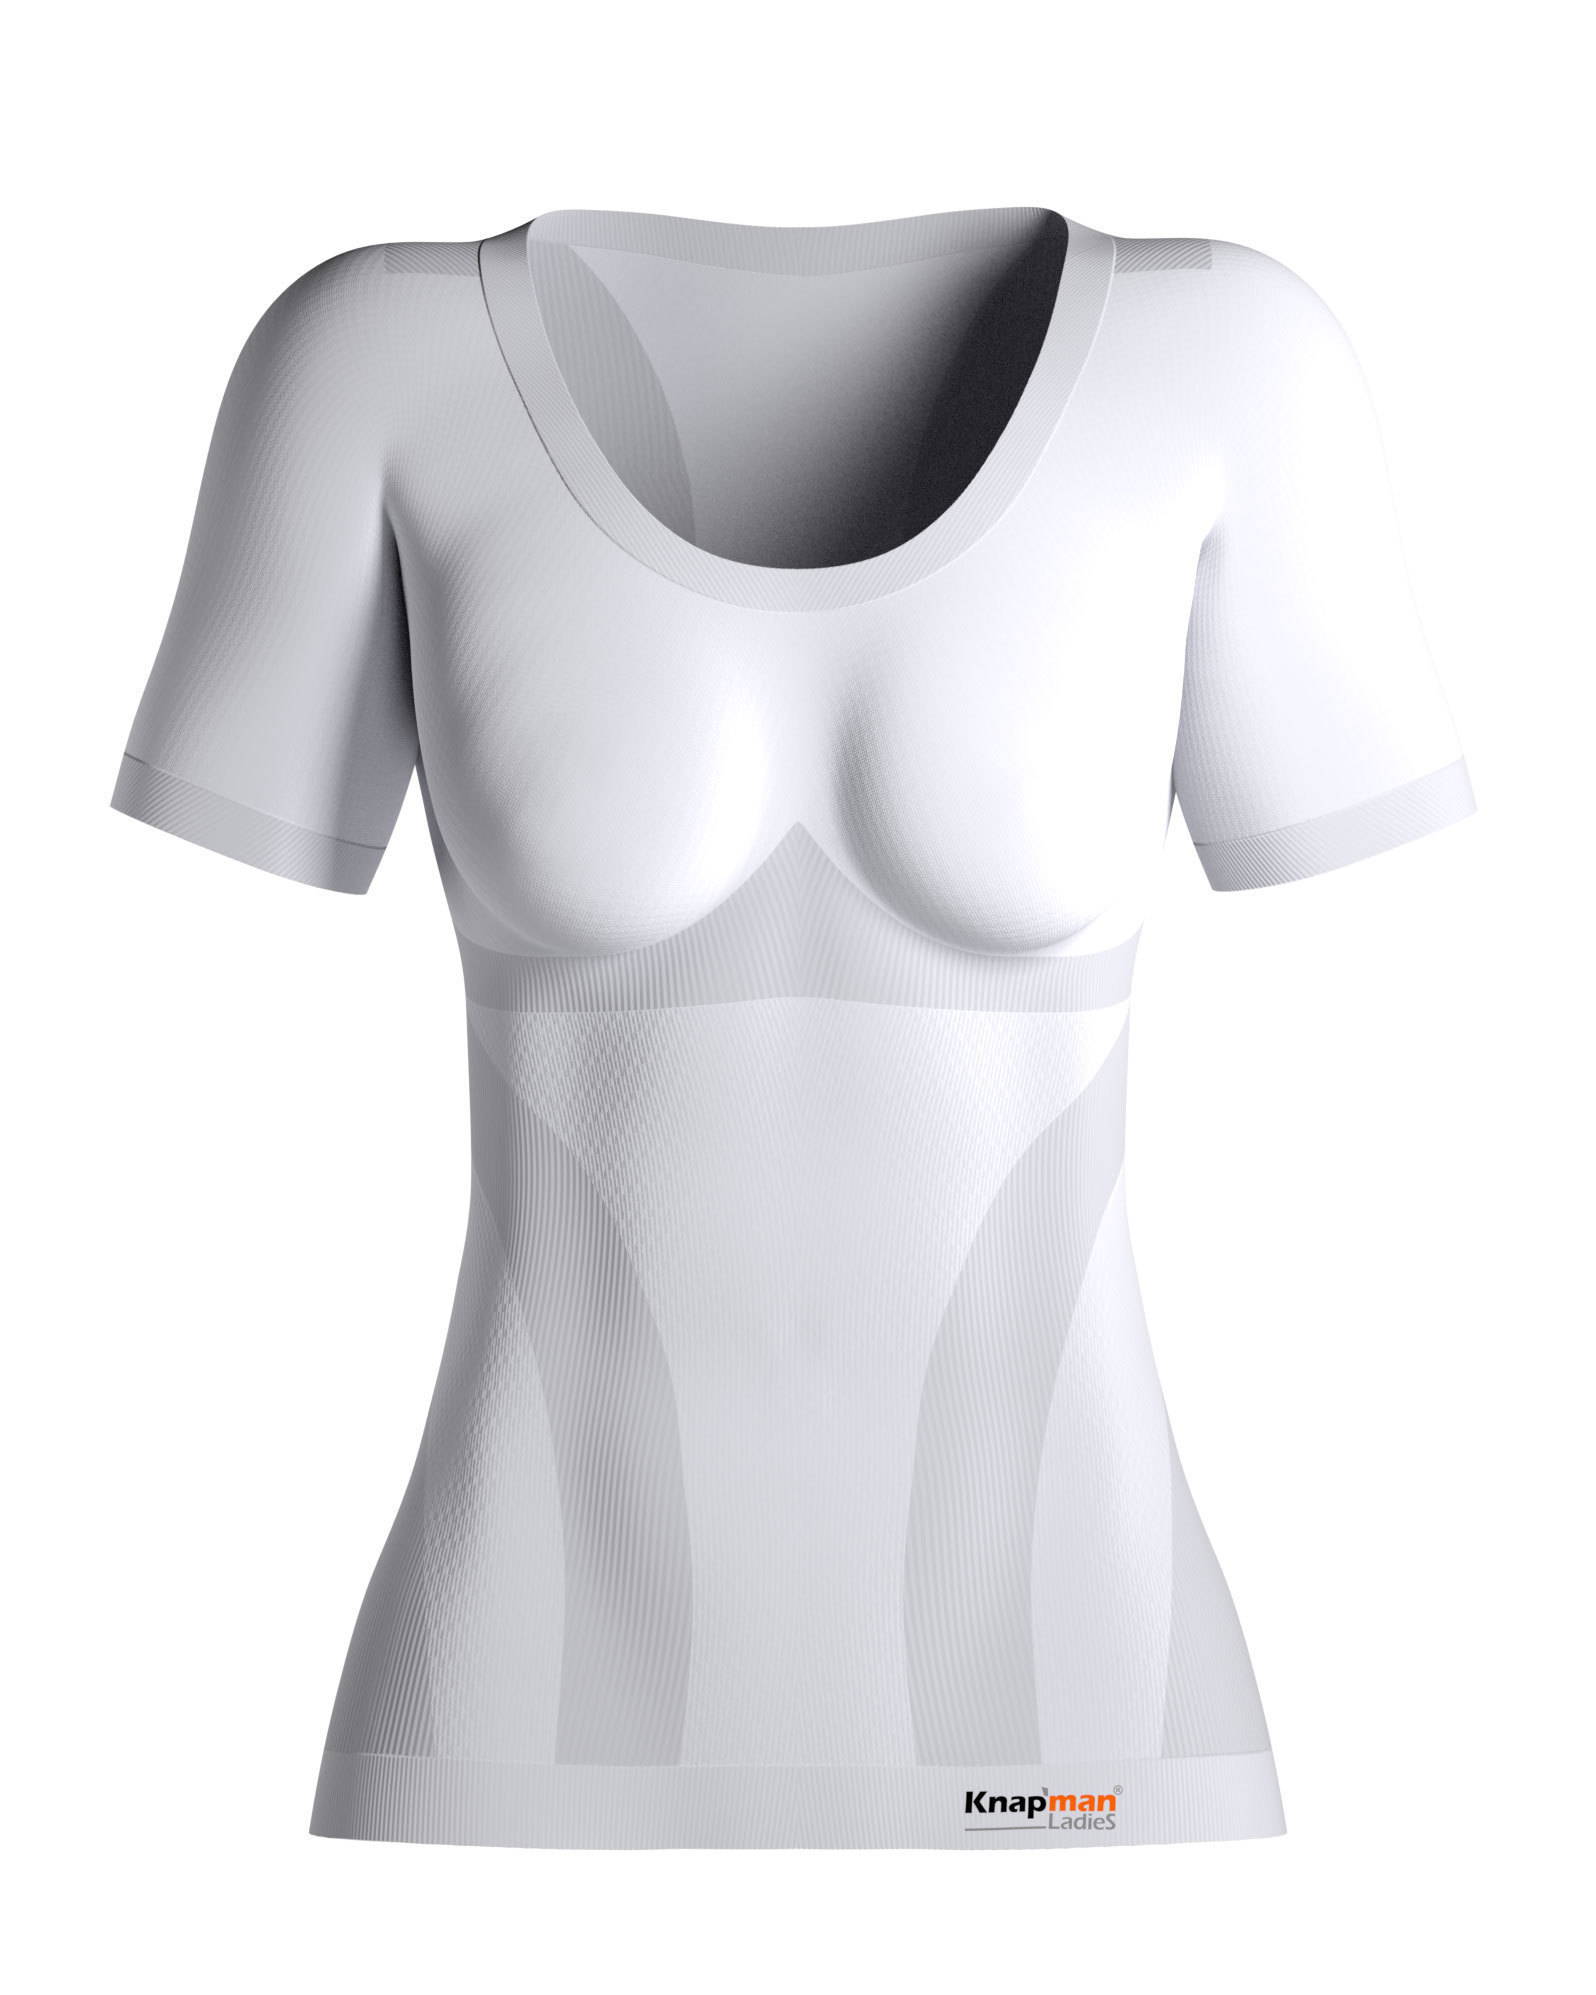 Knapman<sup>�</sup> Women's Zoned Compression Roundneck White